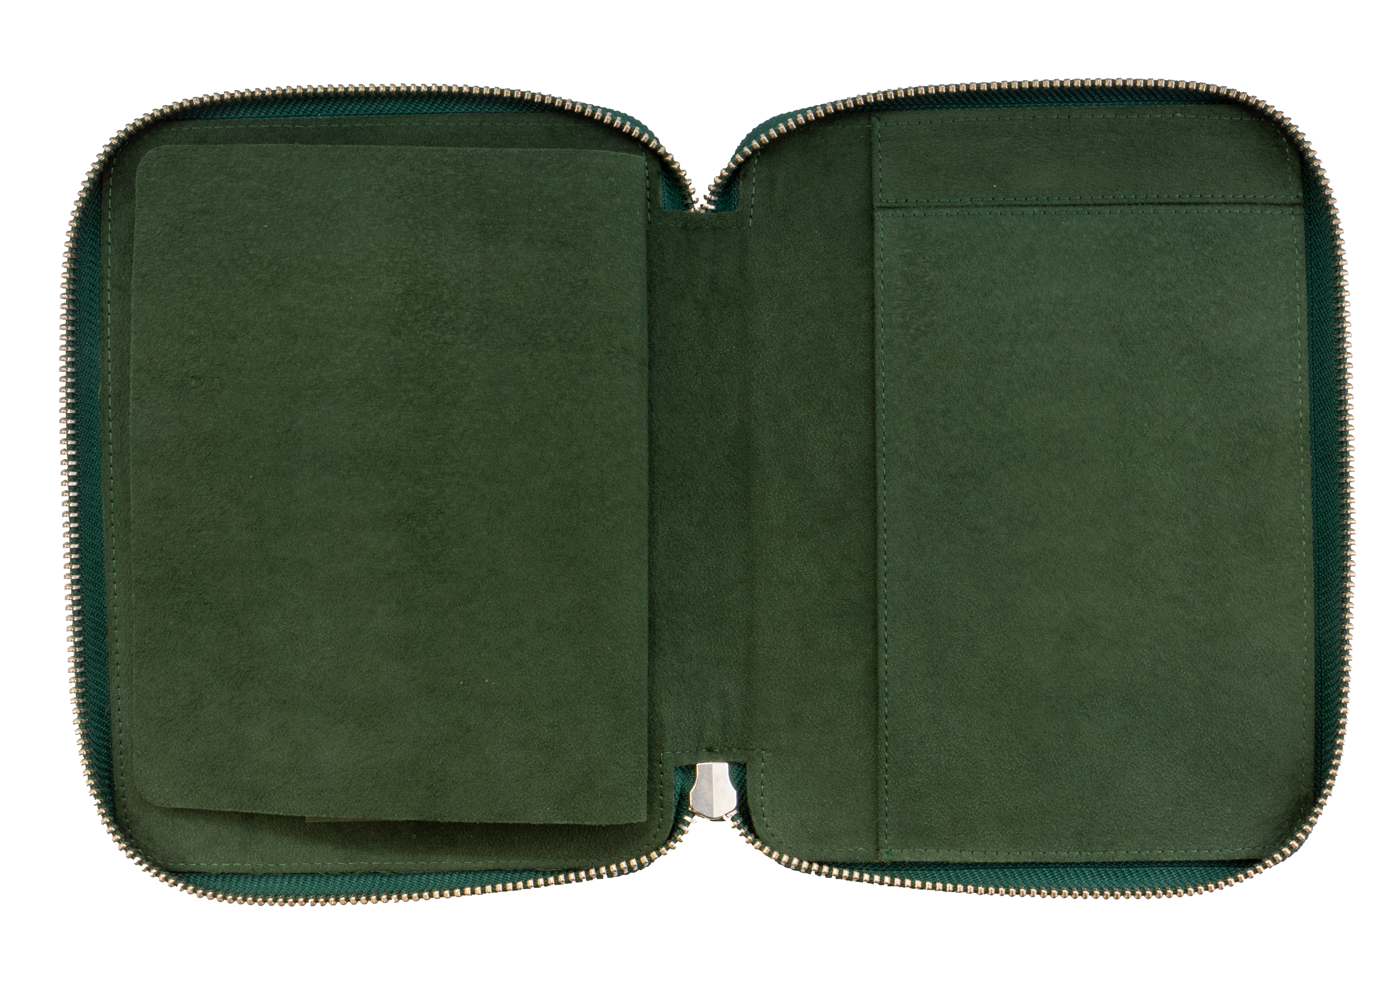 Galen Leather Co. Zippered 10 Slot Pen Case with A5 Notebook Holder - Crazy Horse Green